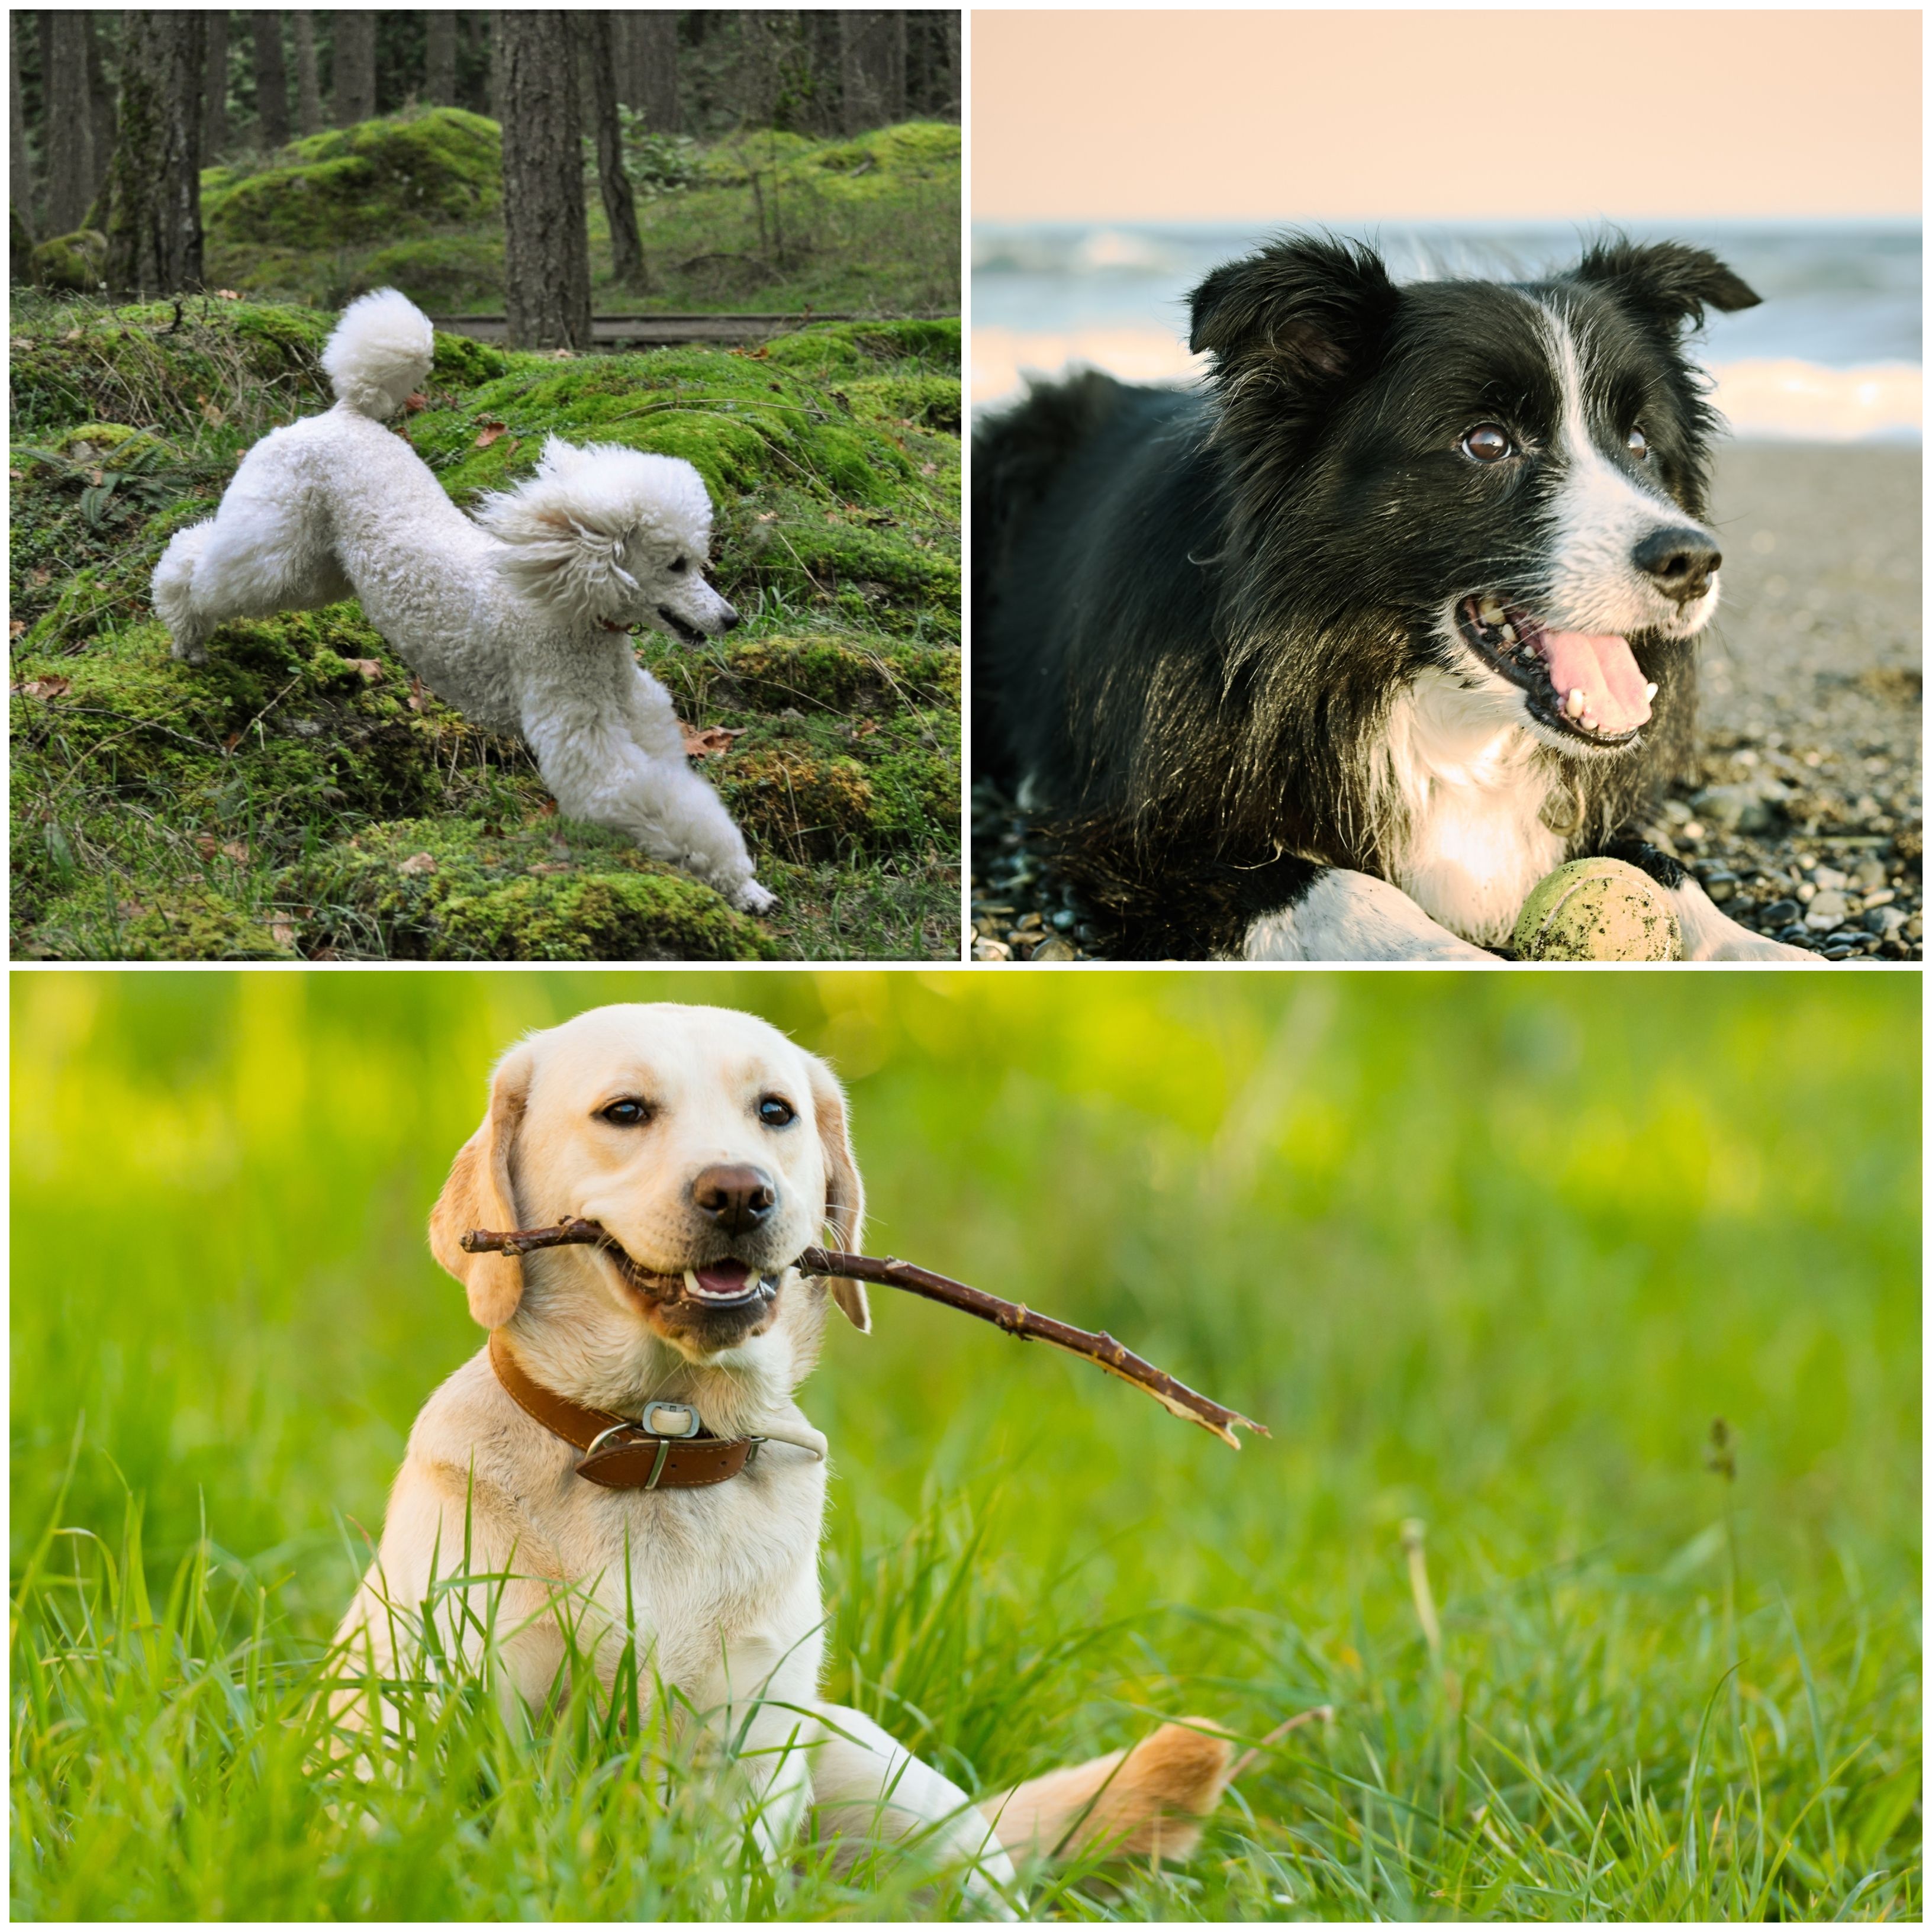 best dog breeds for working owners